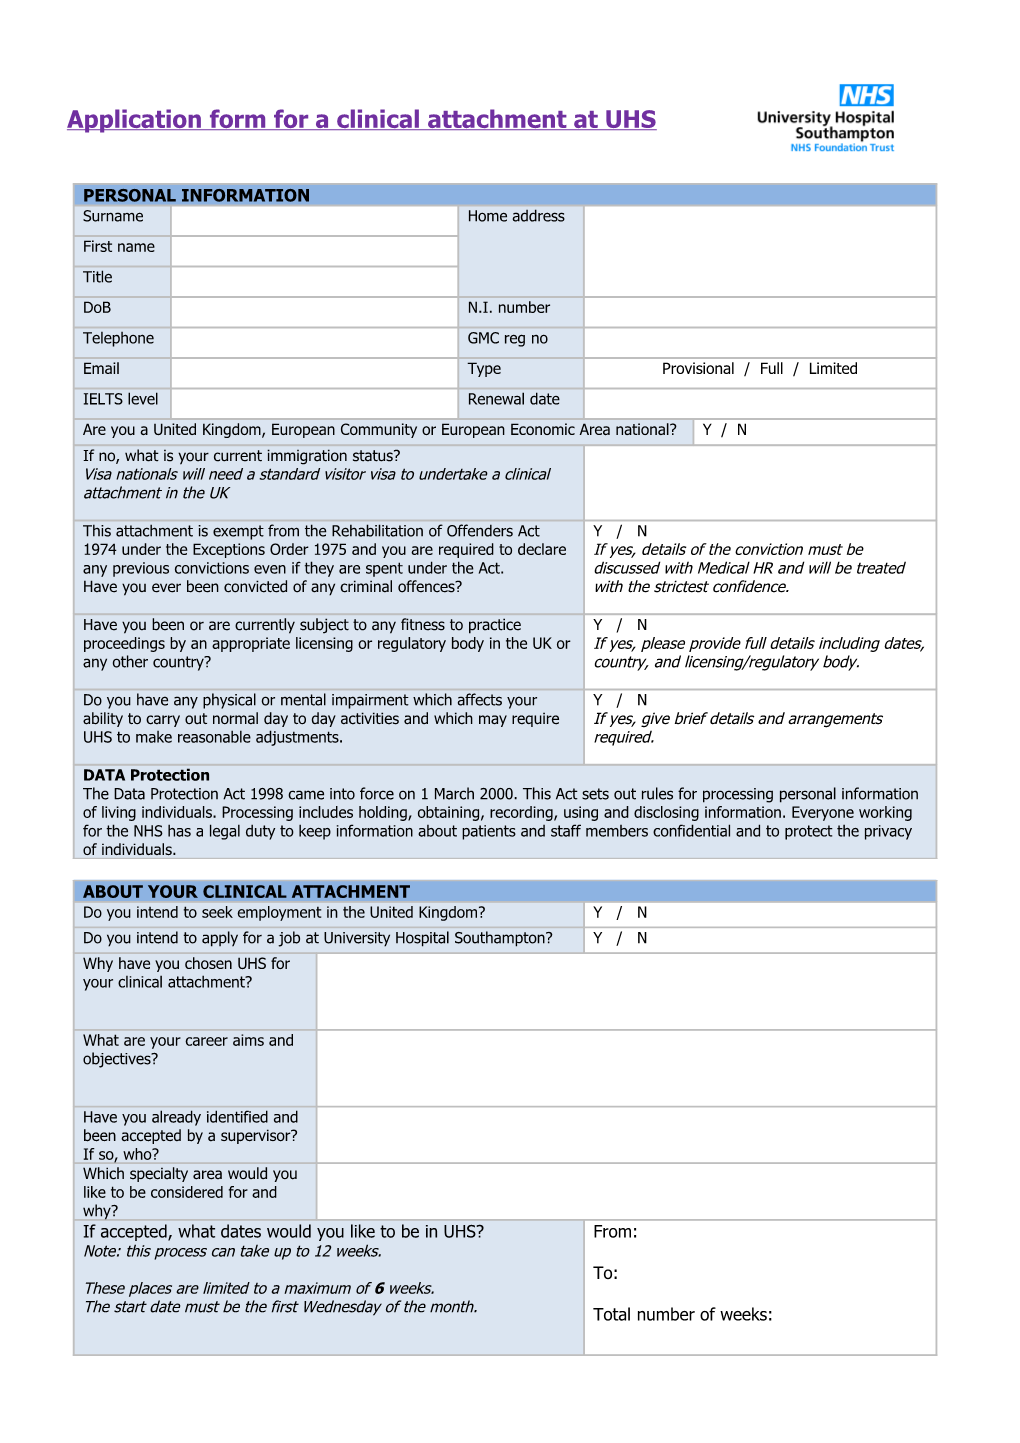 Application Form for Clinical Attachments